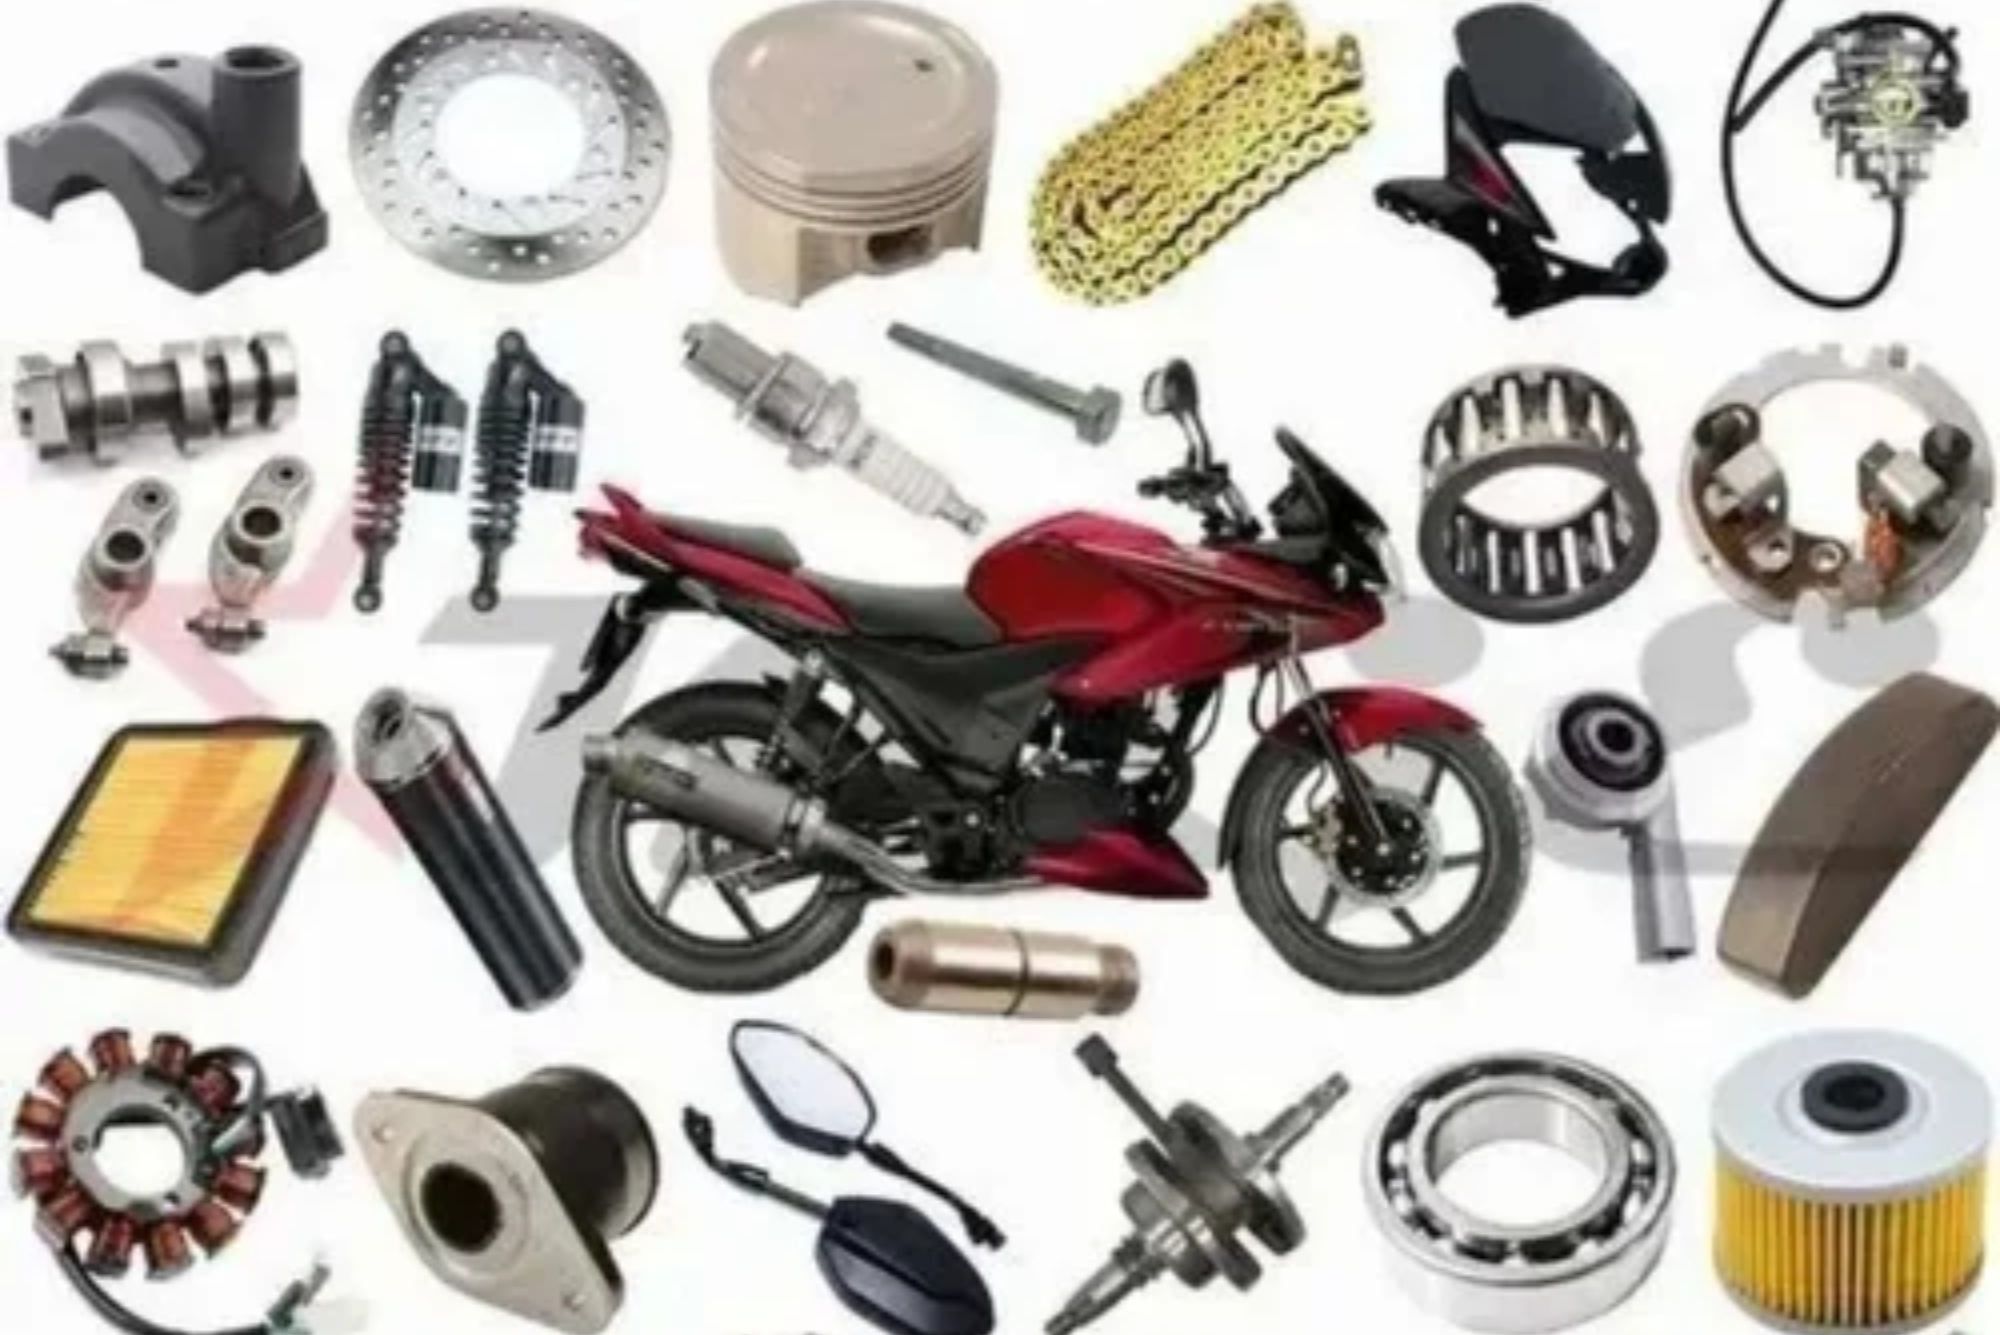 how many spare parts in a bike